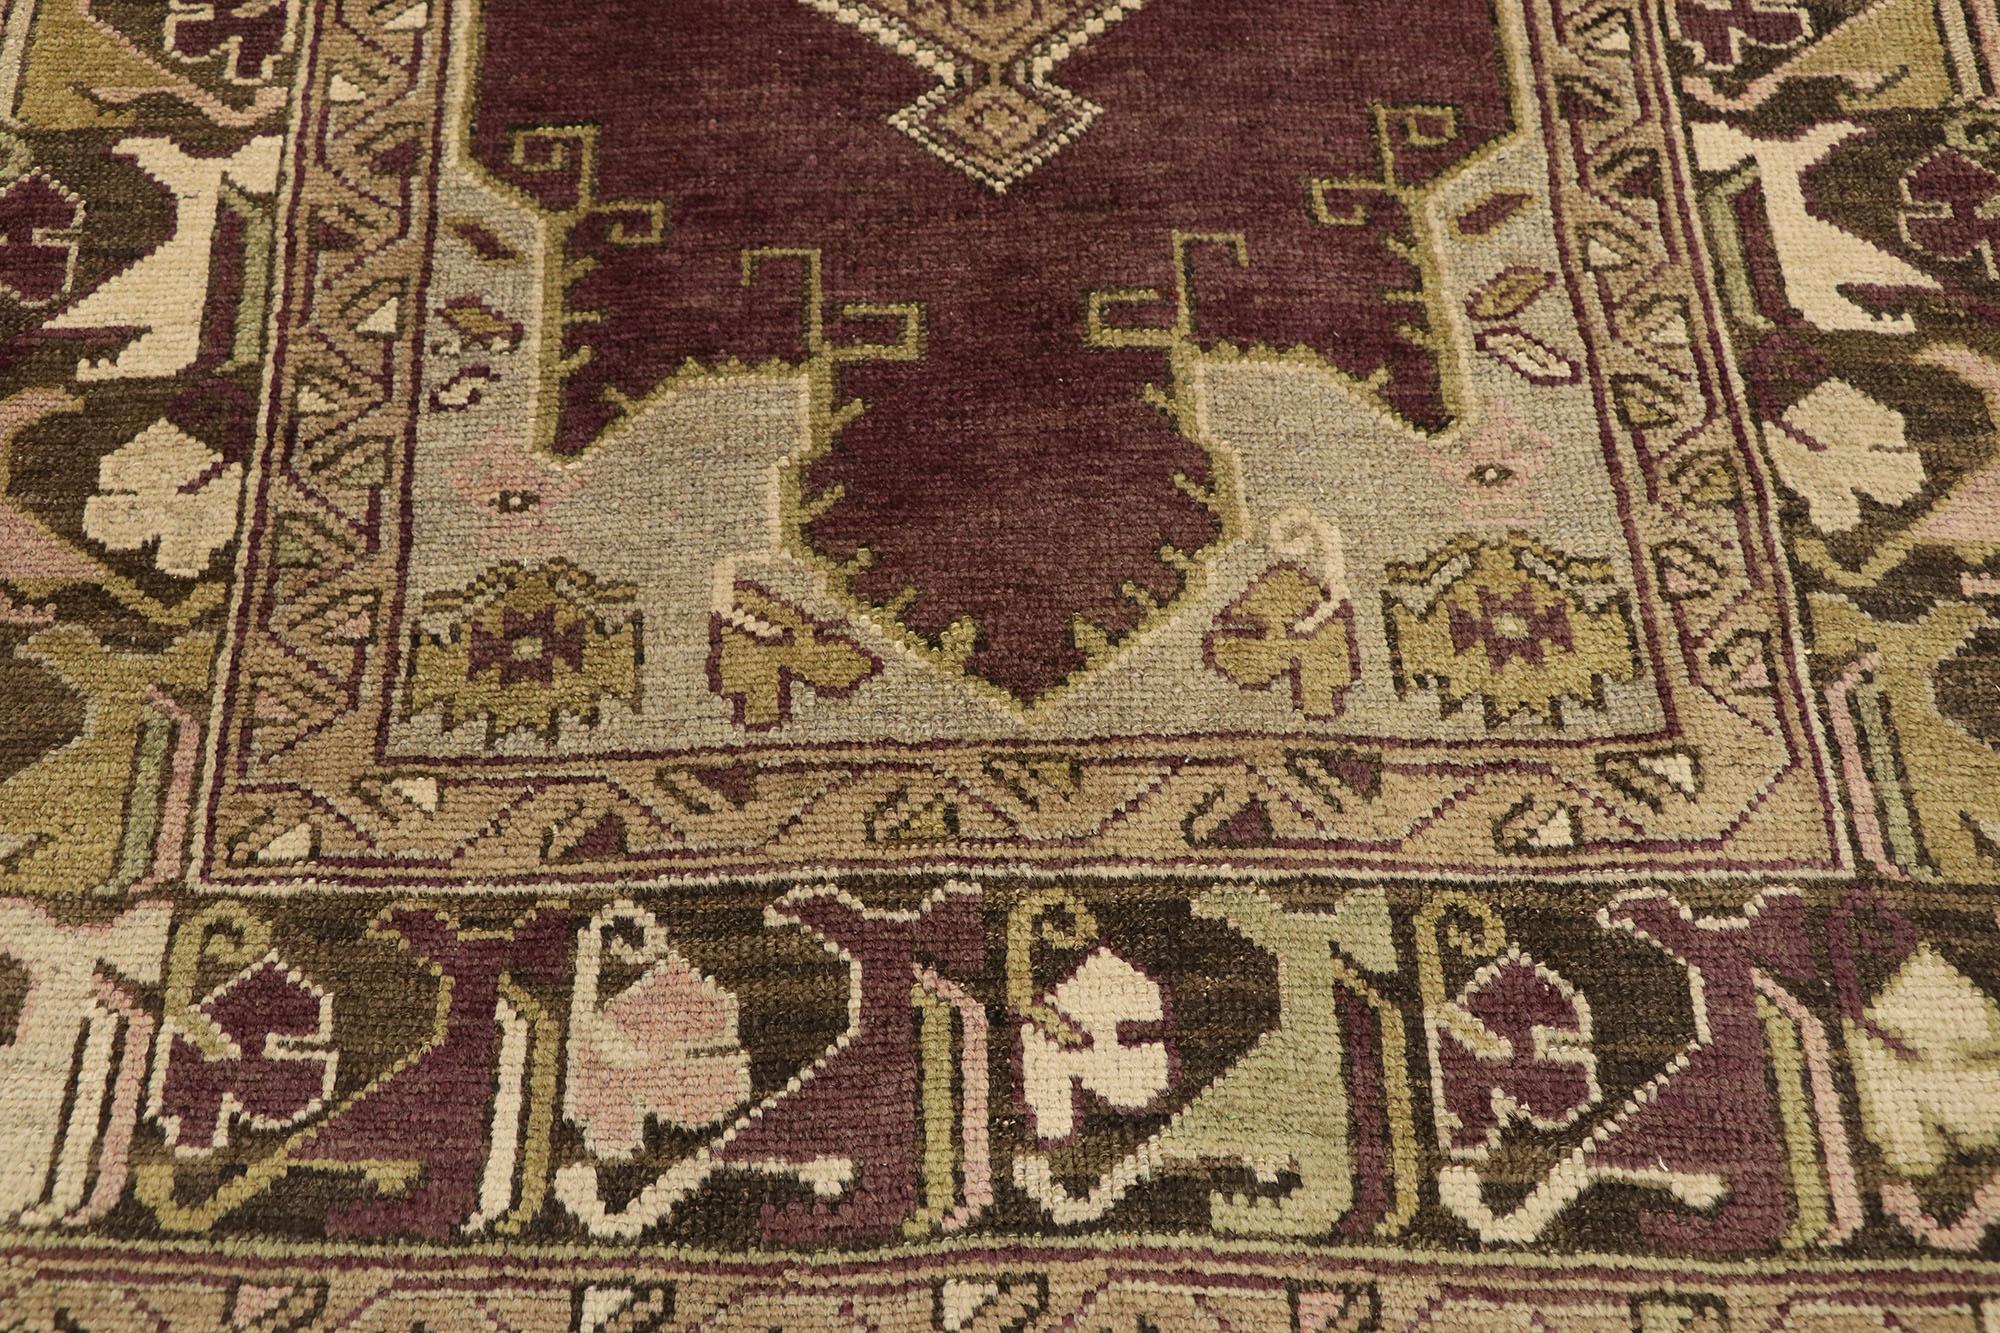 Vintage Turkish Oushak Rug with Venetian Renaissance Style In Good Condition For Sale In Dallas, TX